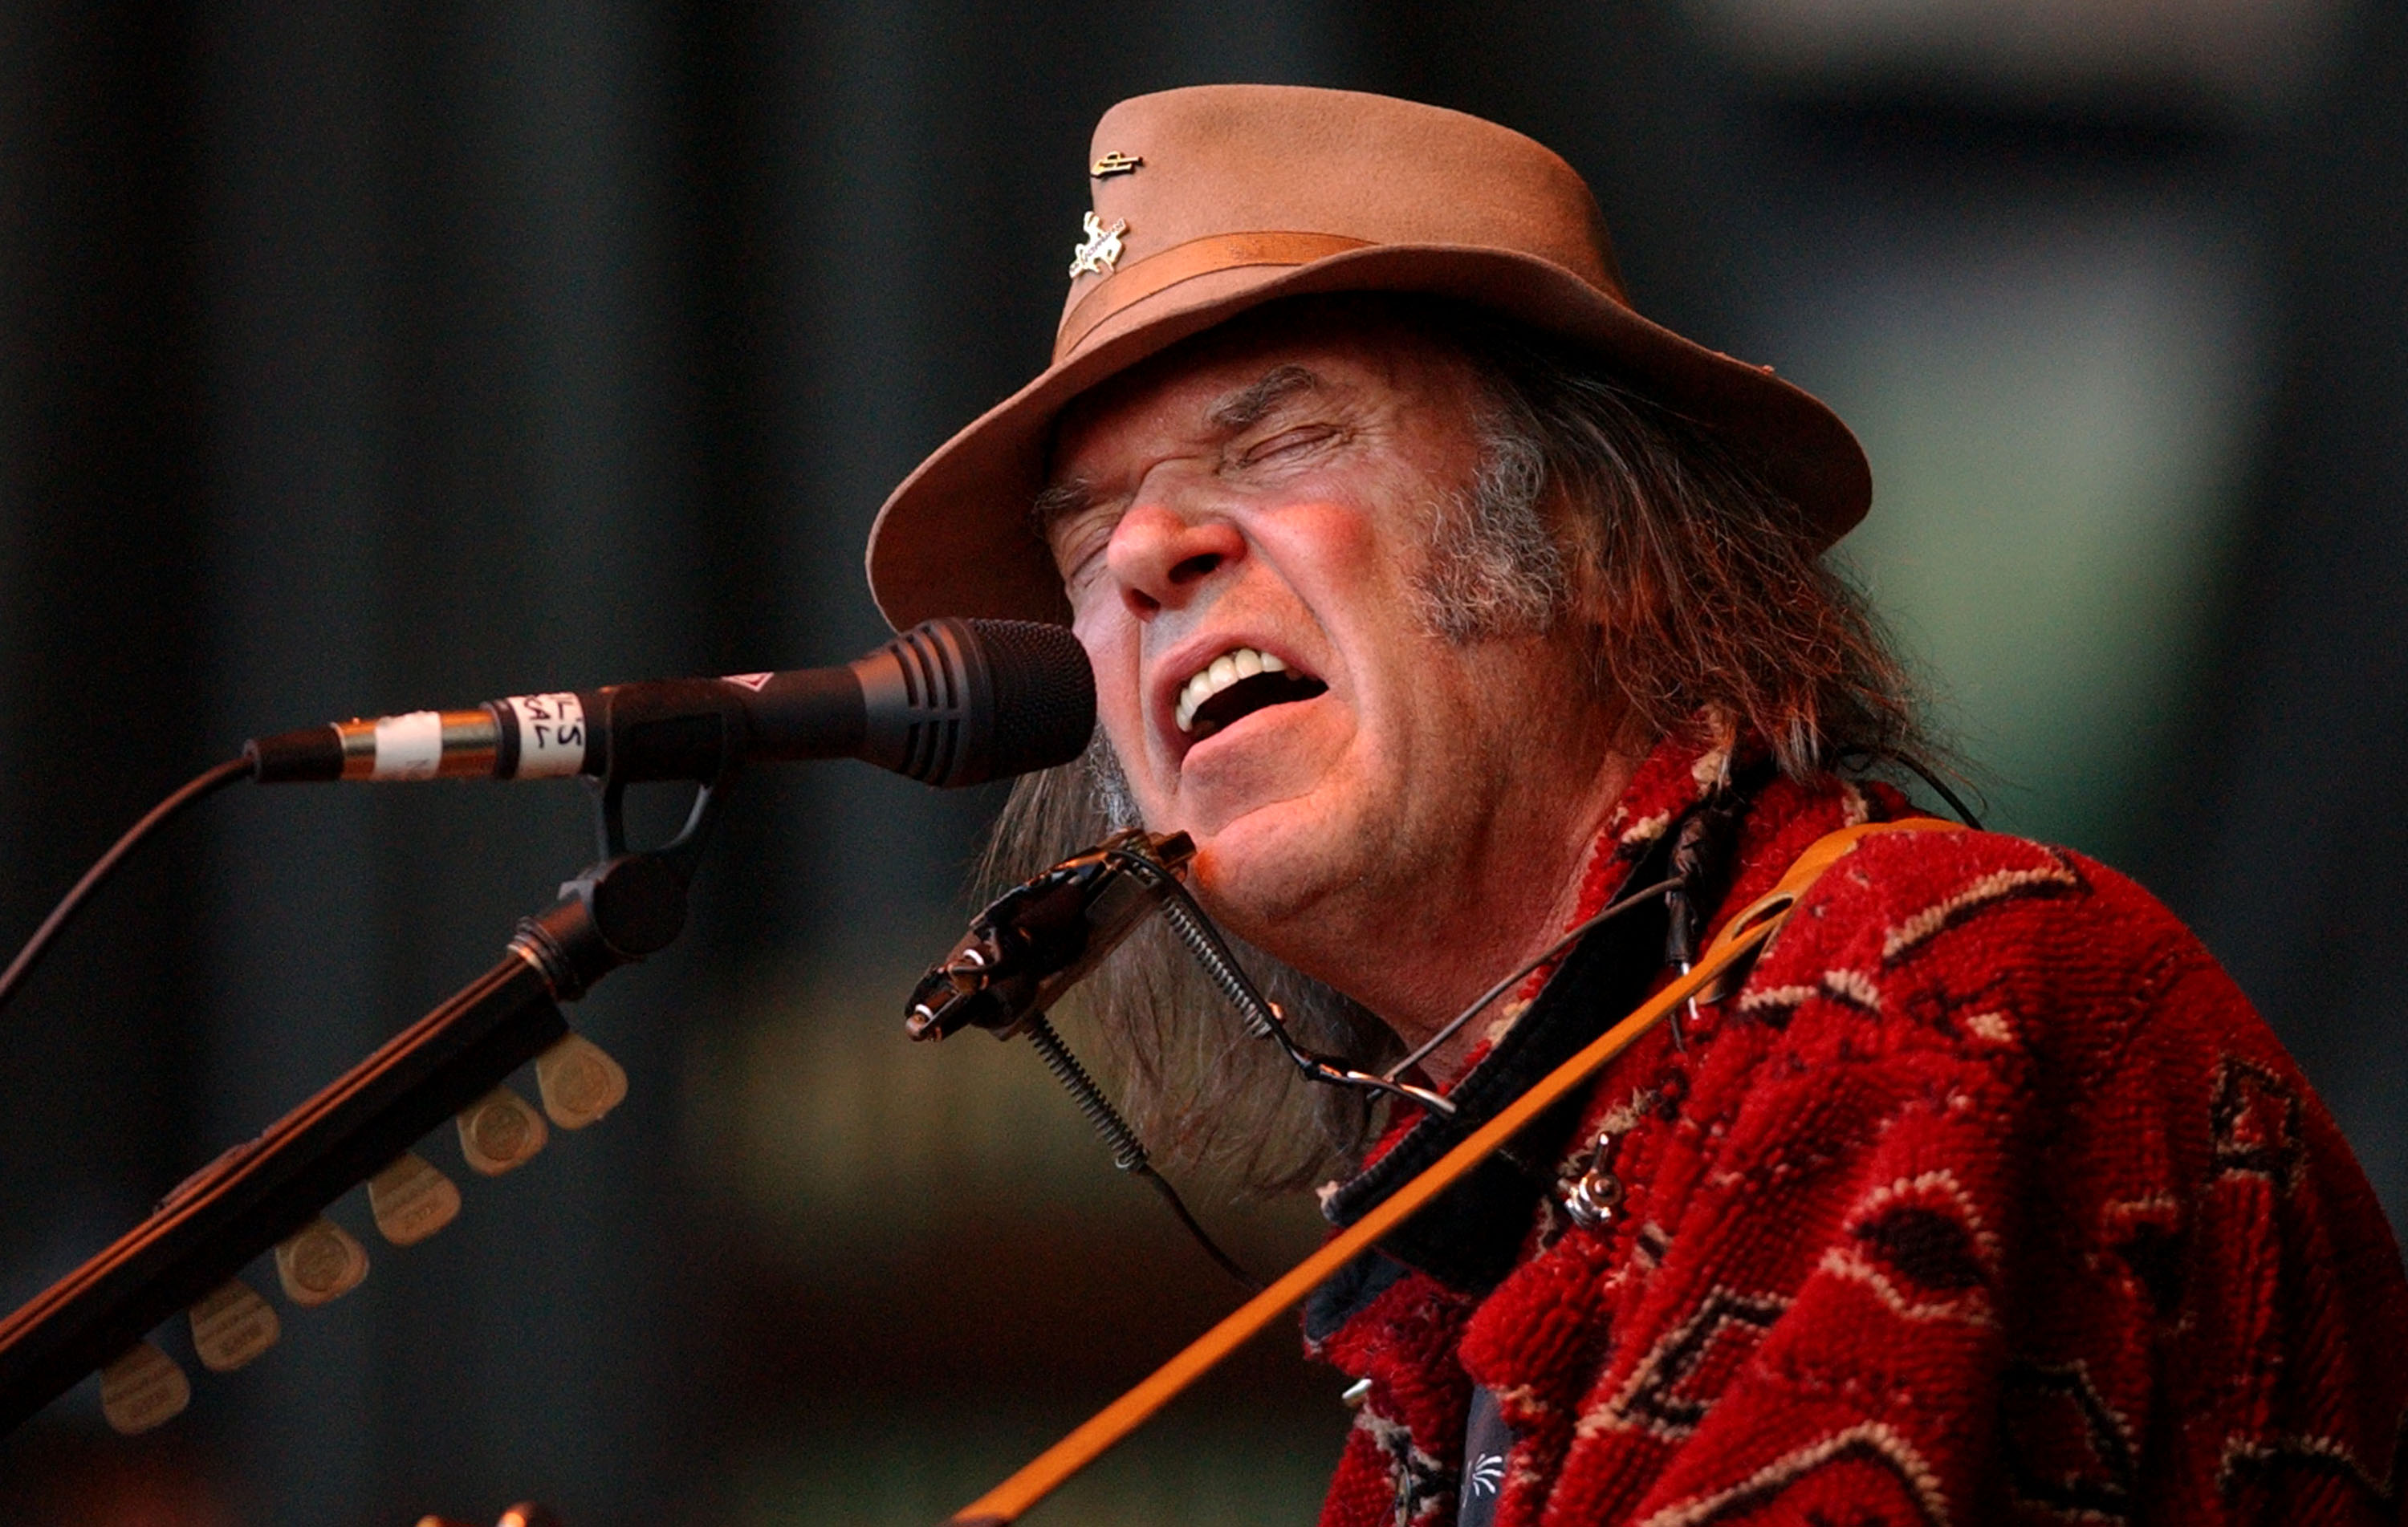 Neil Young At The 16th Annual Bridge School benefit concert